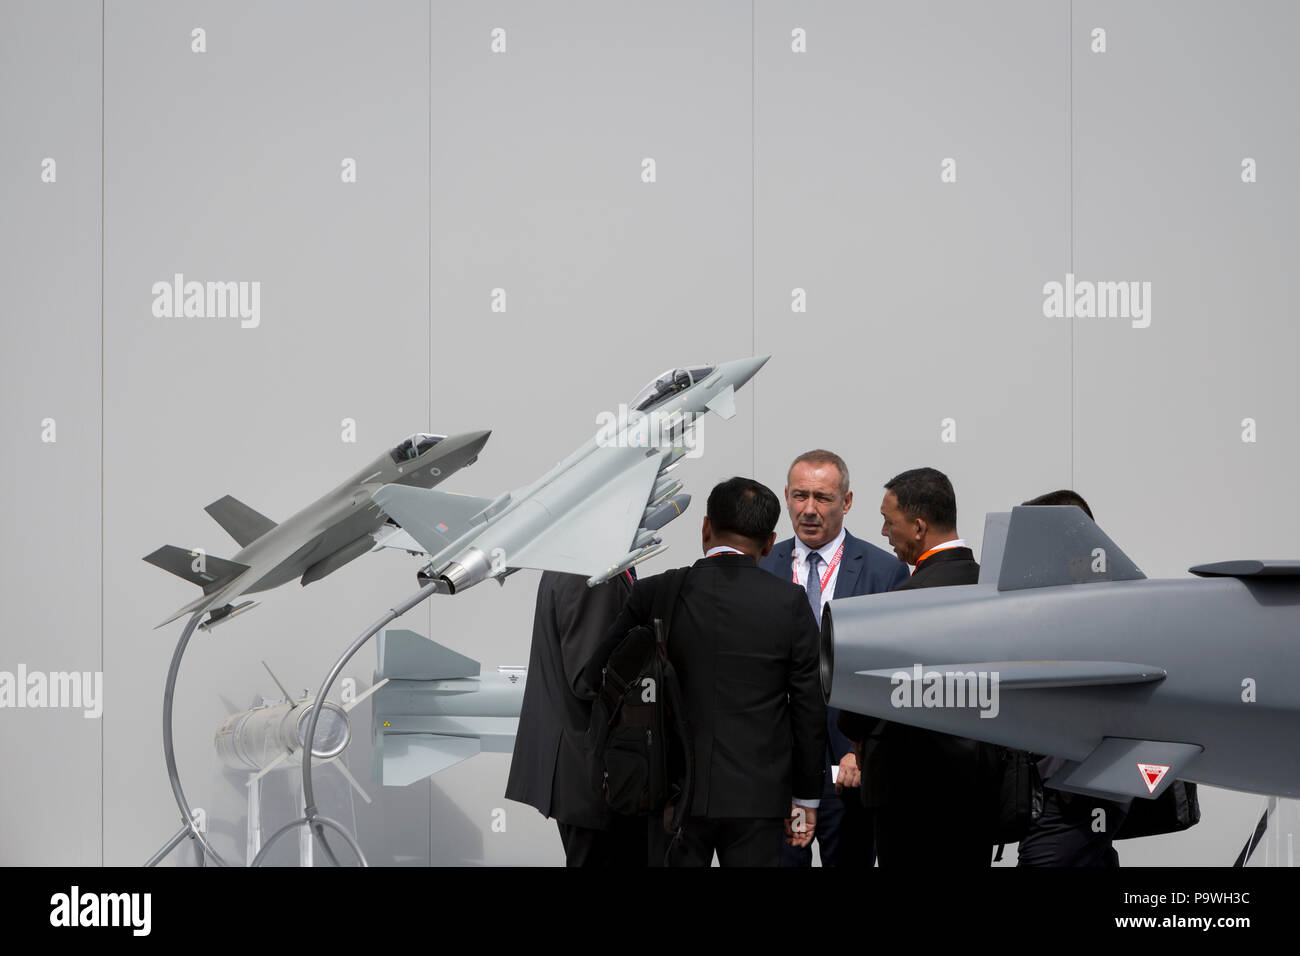 Potential customers get a briefing next to the MBDA Storm Shadow / SCALP missile system plus F-35 and Typhoon models outside the defence company's exhibition and hospitality chalet at the Farnborough Airshow, on 16th July 2018, in Farnborough, England. Stock Photo